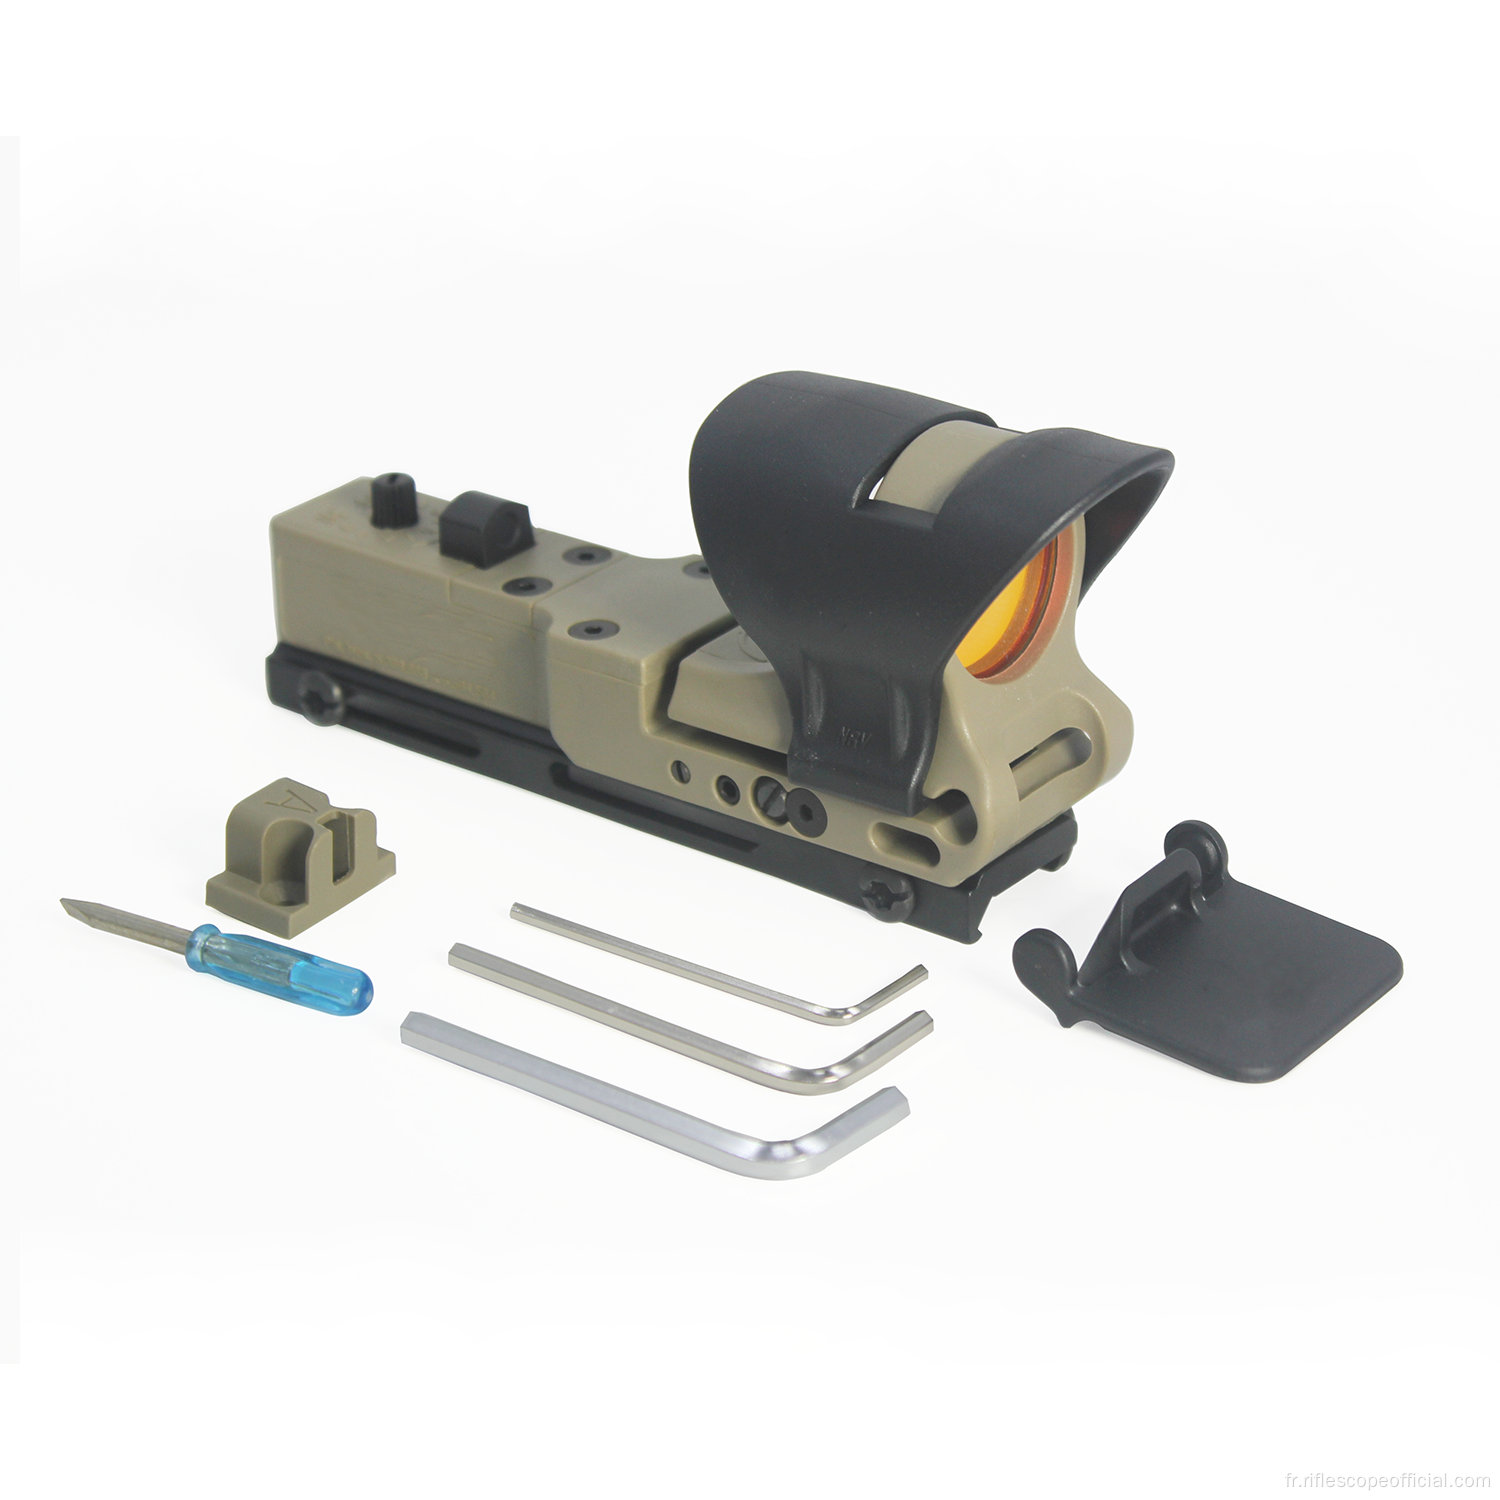 C-more Systems Railway Red Dot Sight